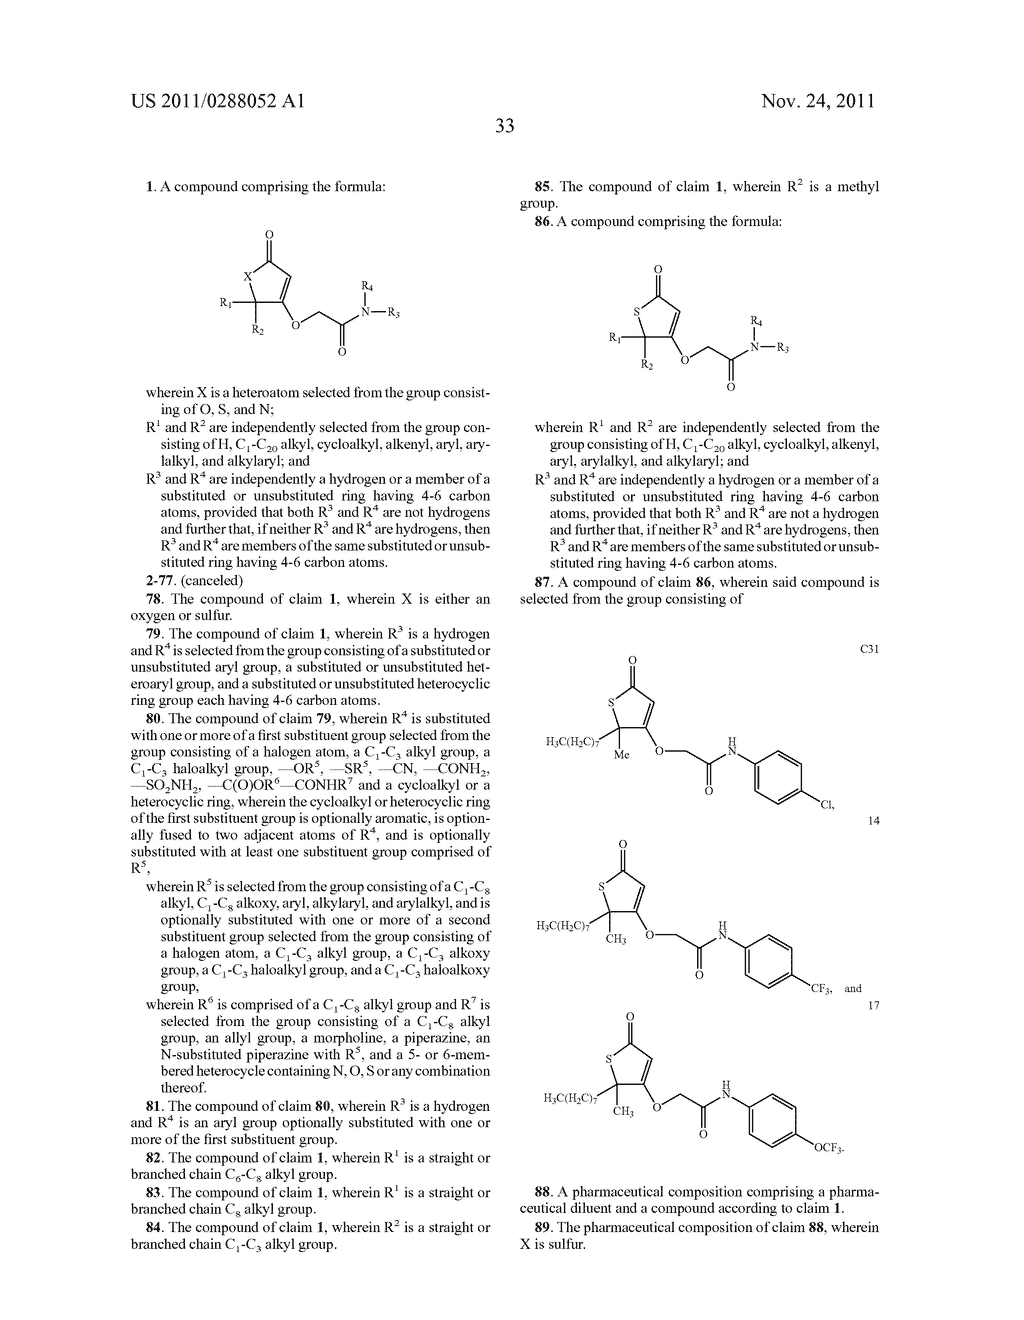 NOVEL COMPOUNDS, PHARMACEUTICAL COMPOSITIONS CONTAINING SAME, AND METHODS     OF USE FOR SAME - diagram, schematic, and image 40